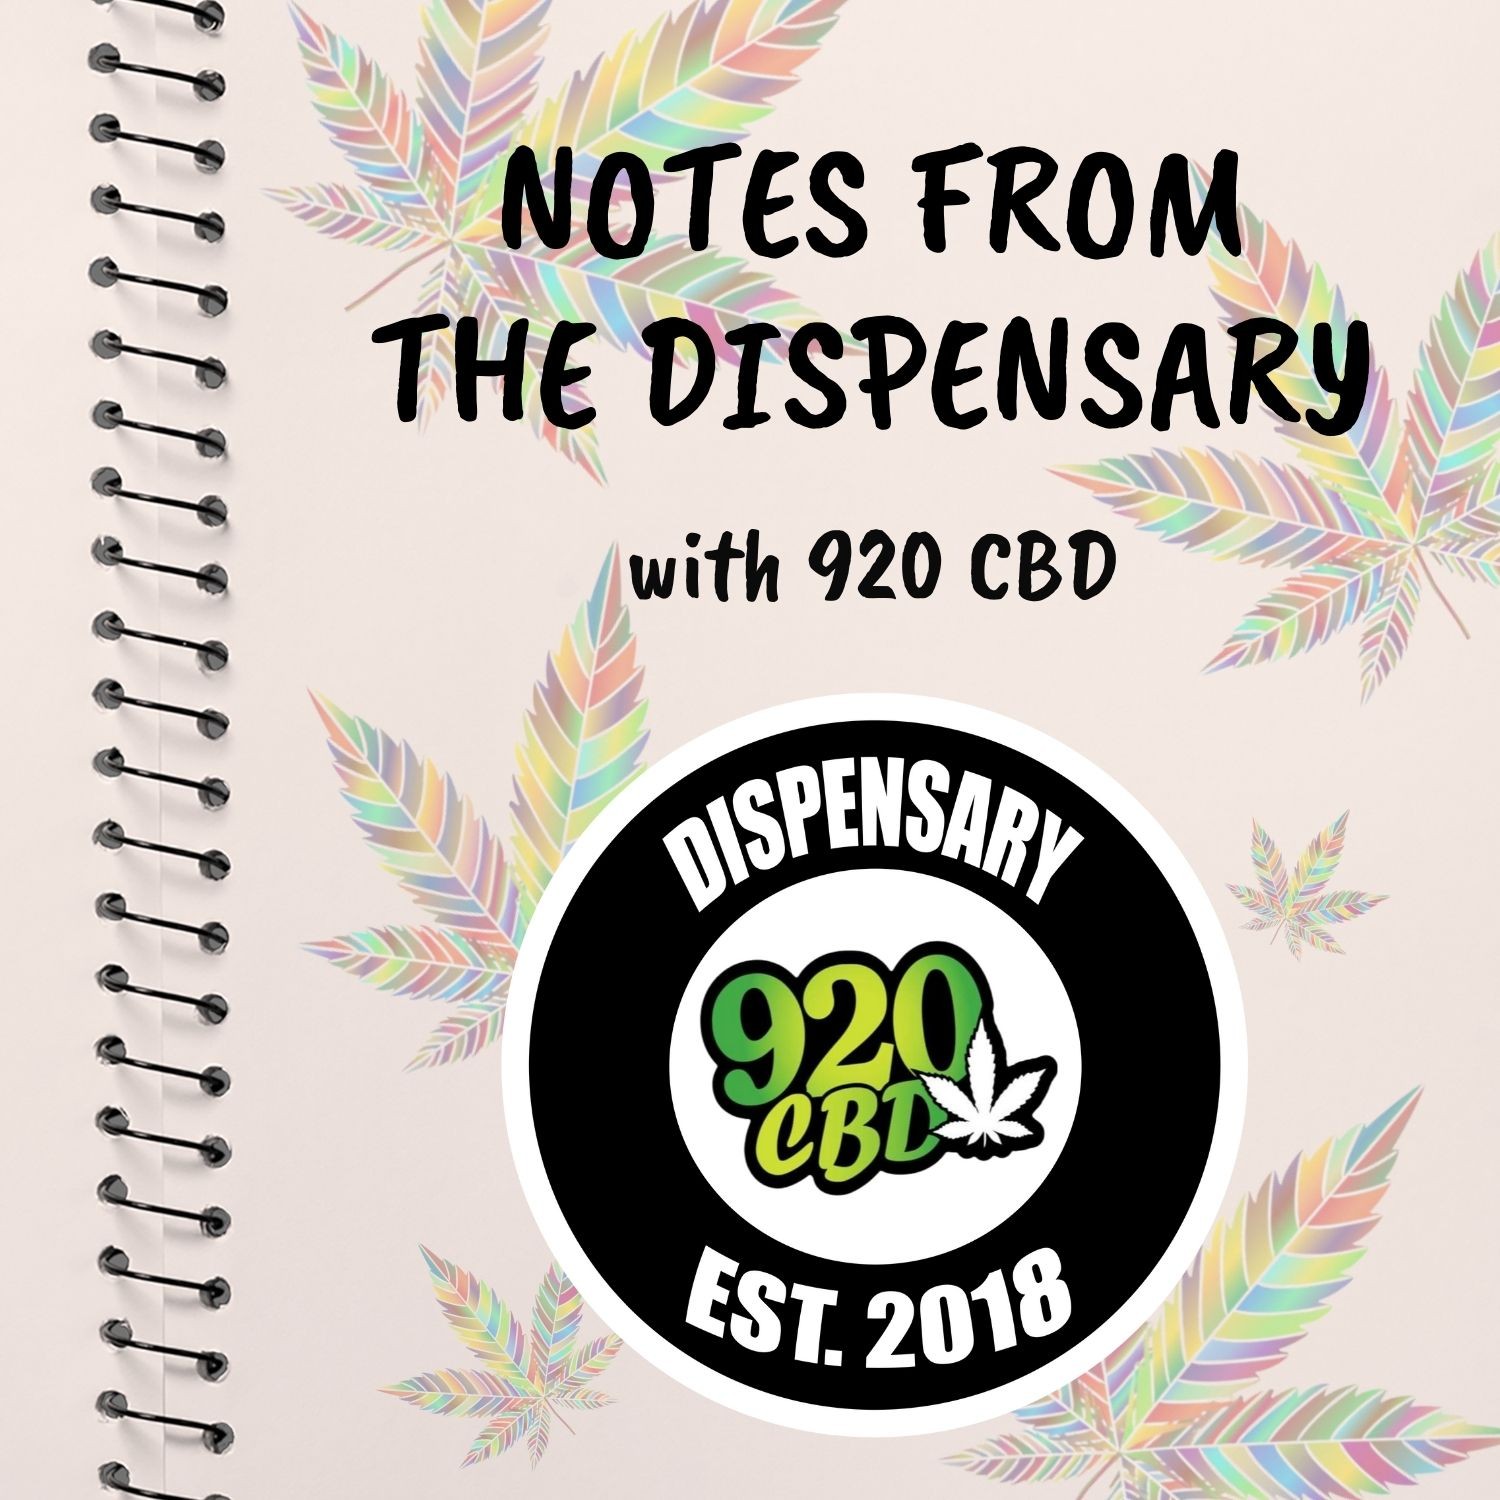 Notes from the Dispensary